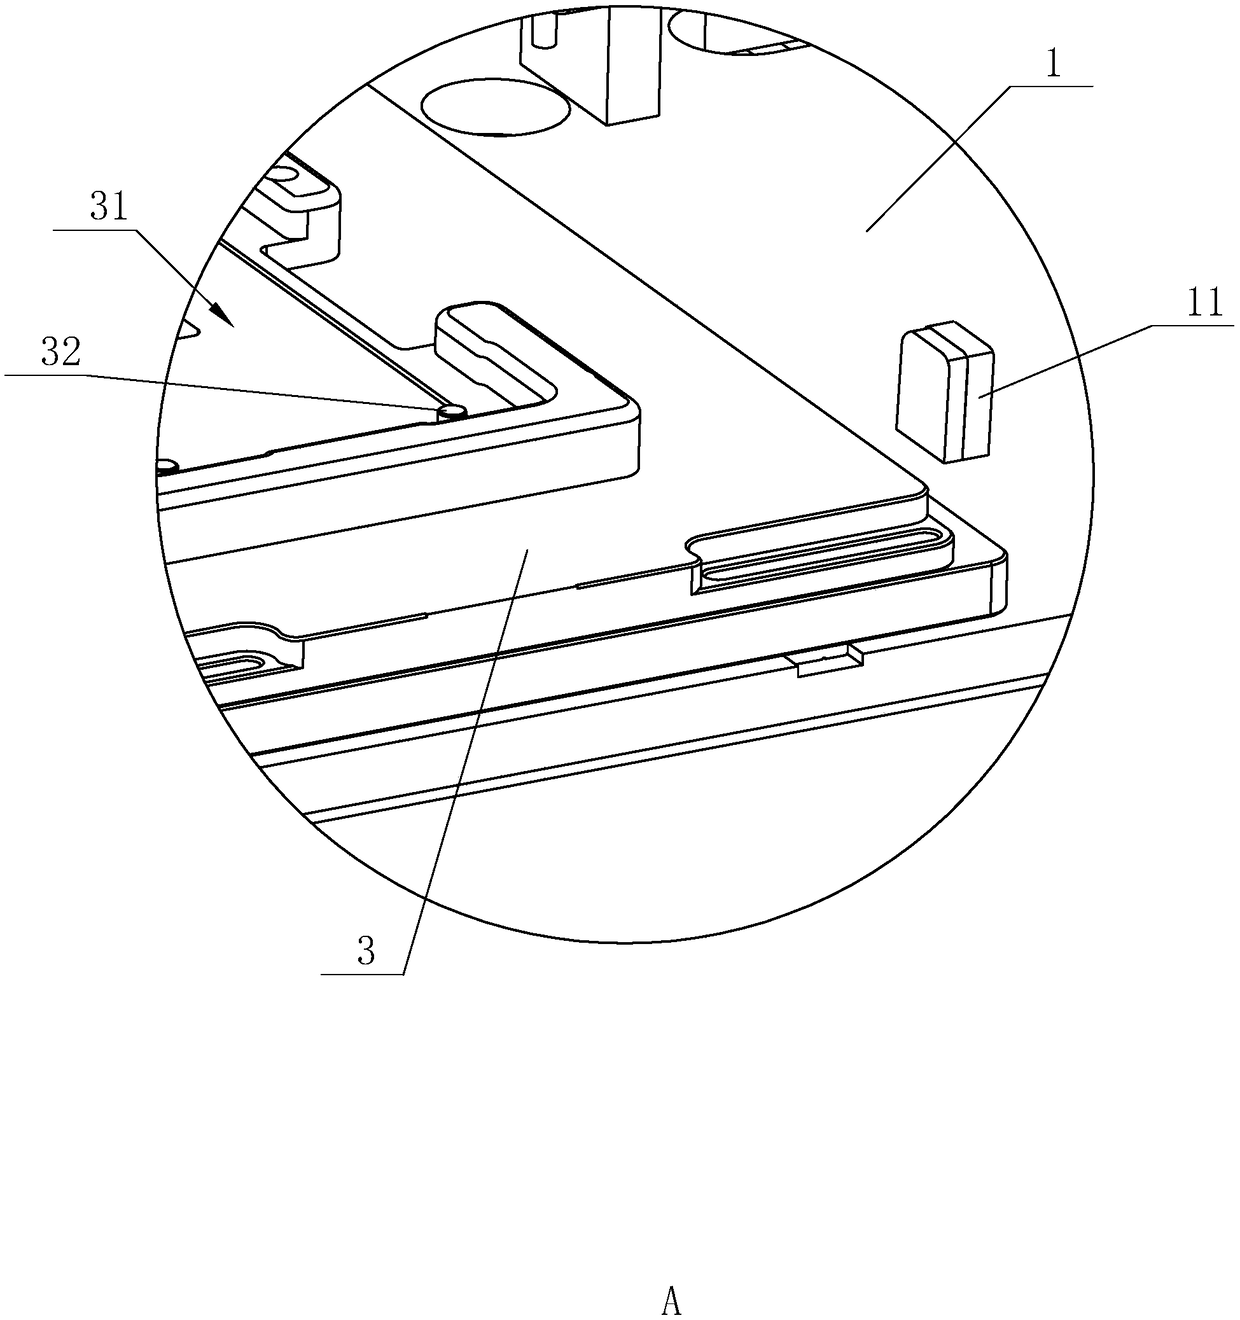 Battery rolling device